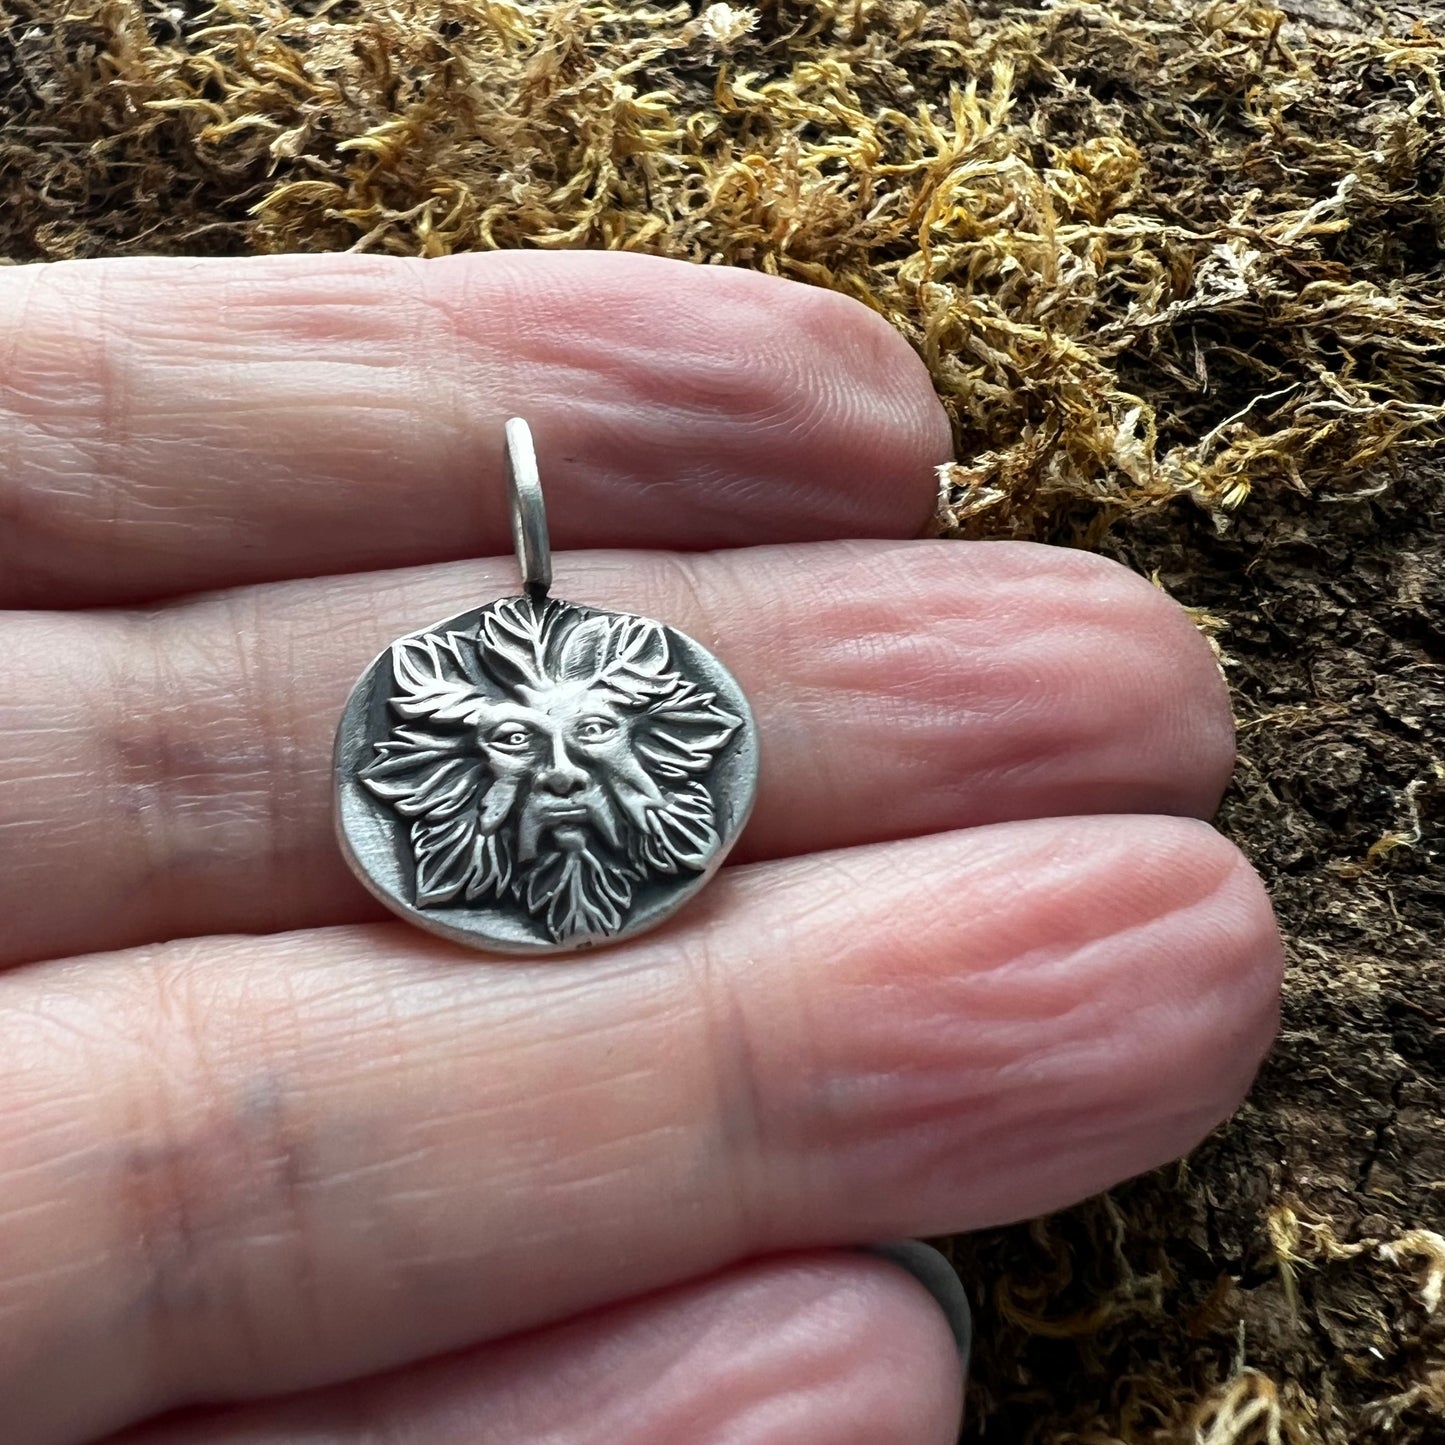 Green Man Medallion, Necklace, Small Dog Silver